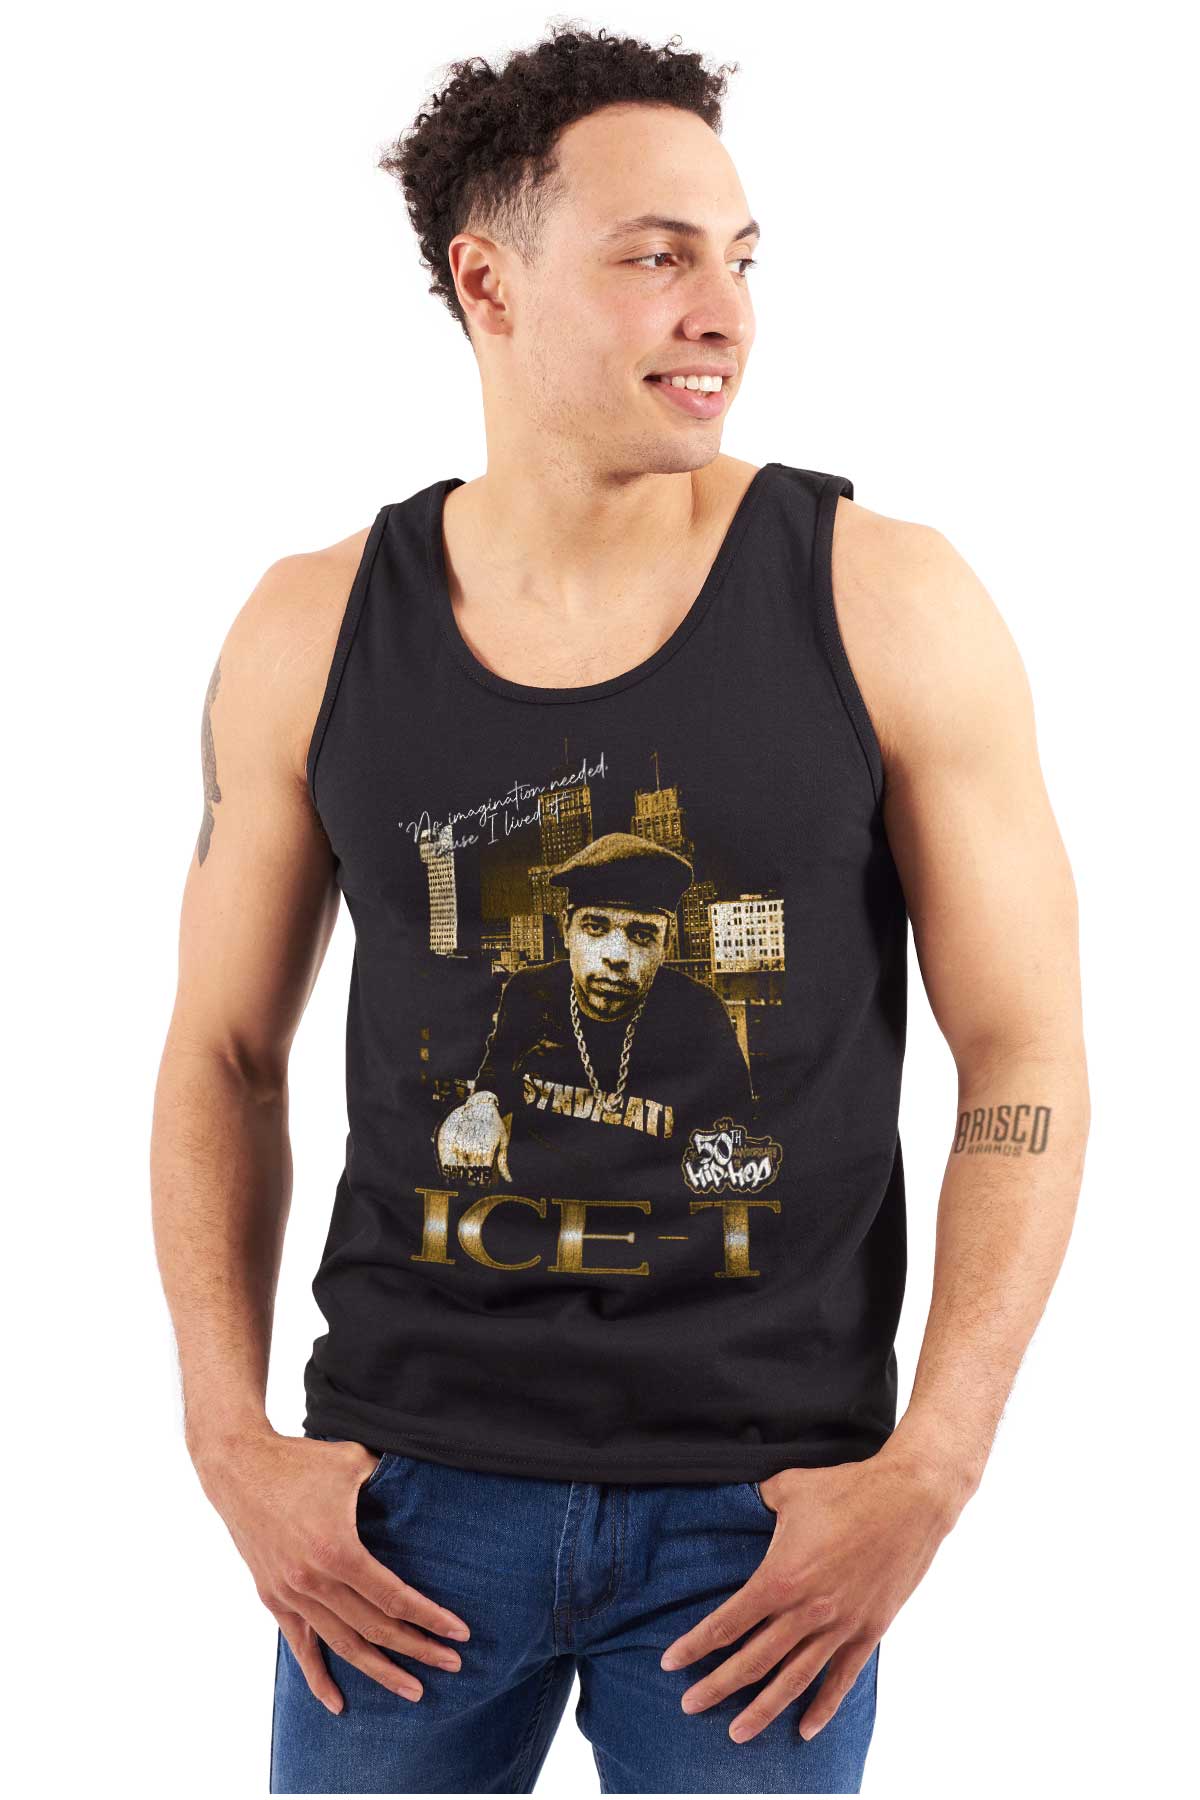 Ice T Tank Top – The 50th Anniversary of Hip-Hop